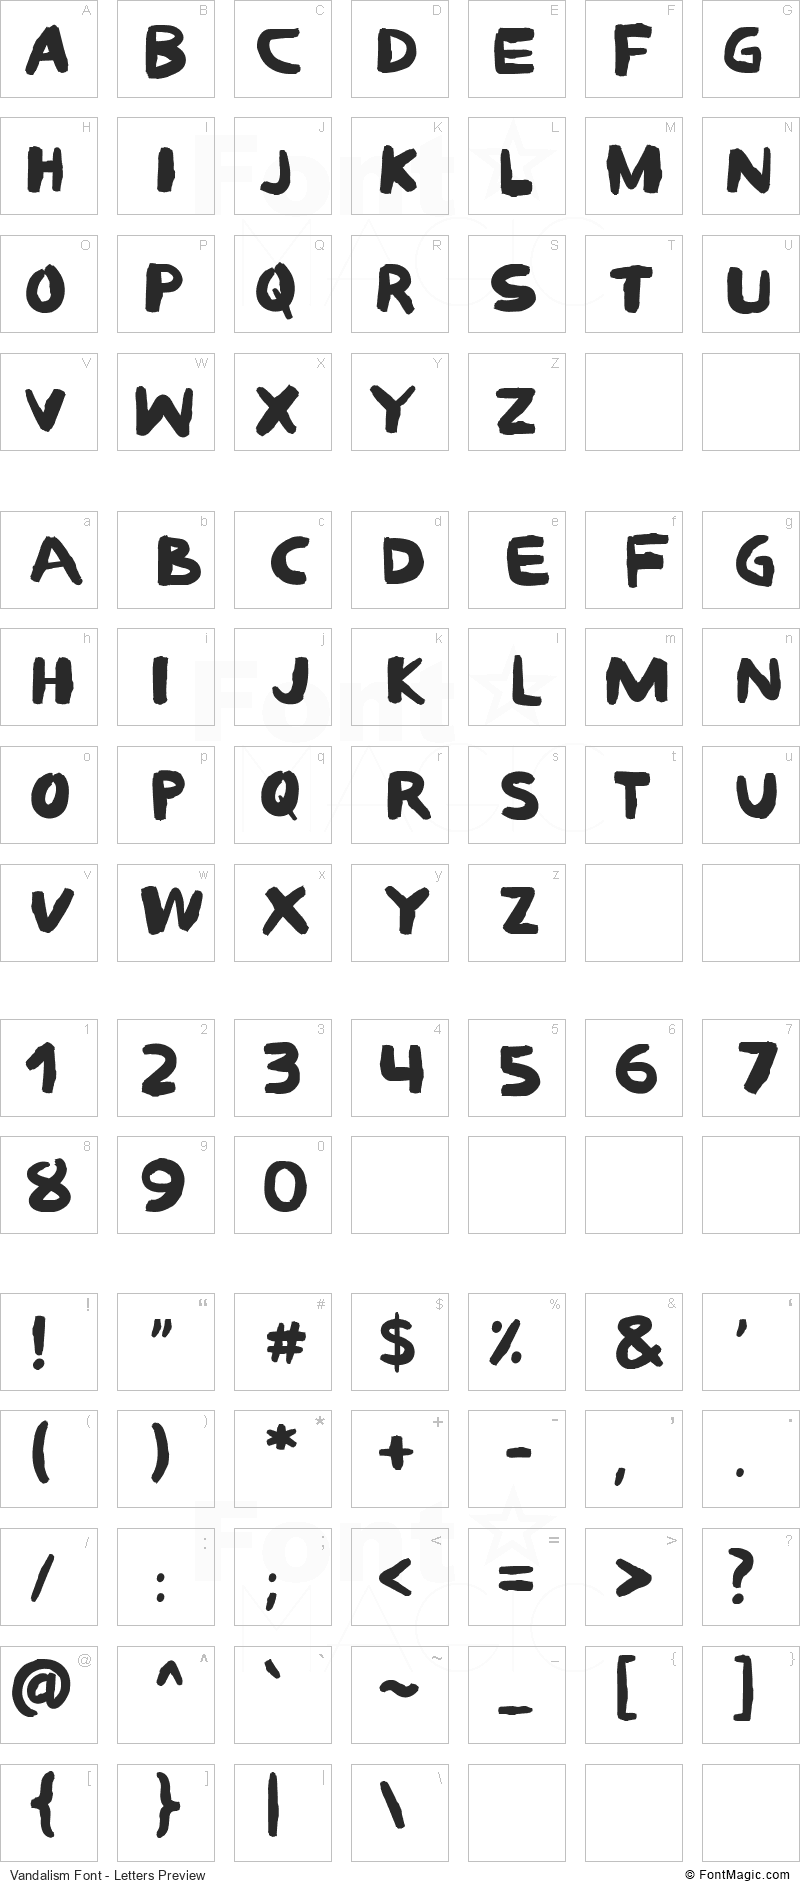 Vandalism Font - All Latters Preview Chart